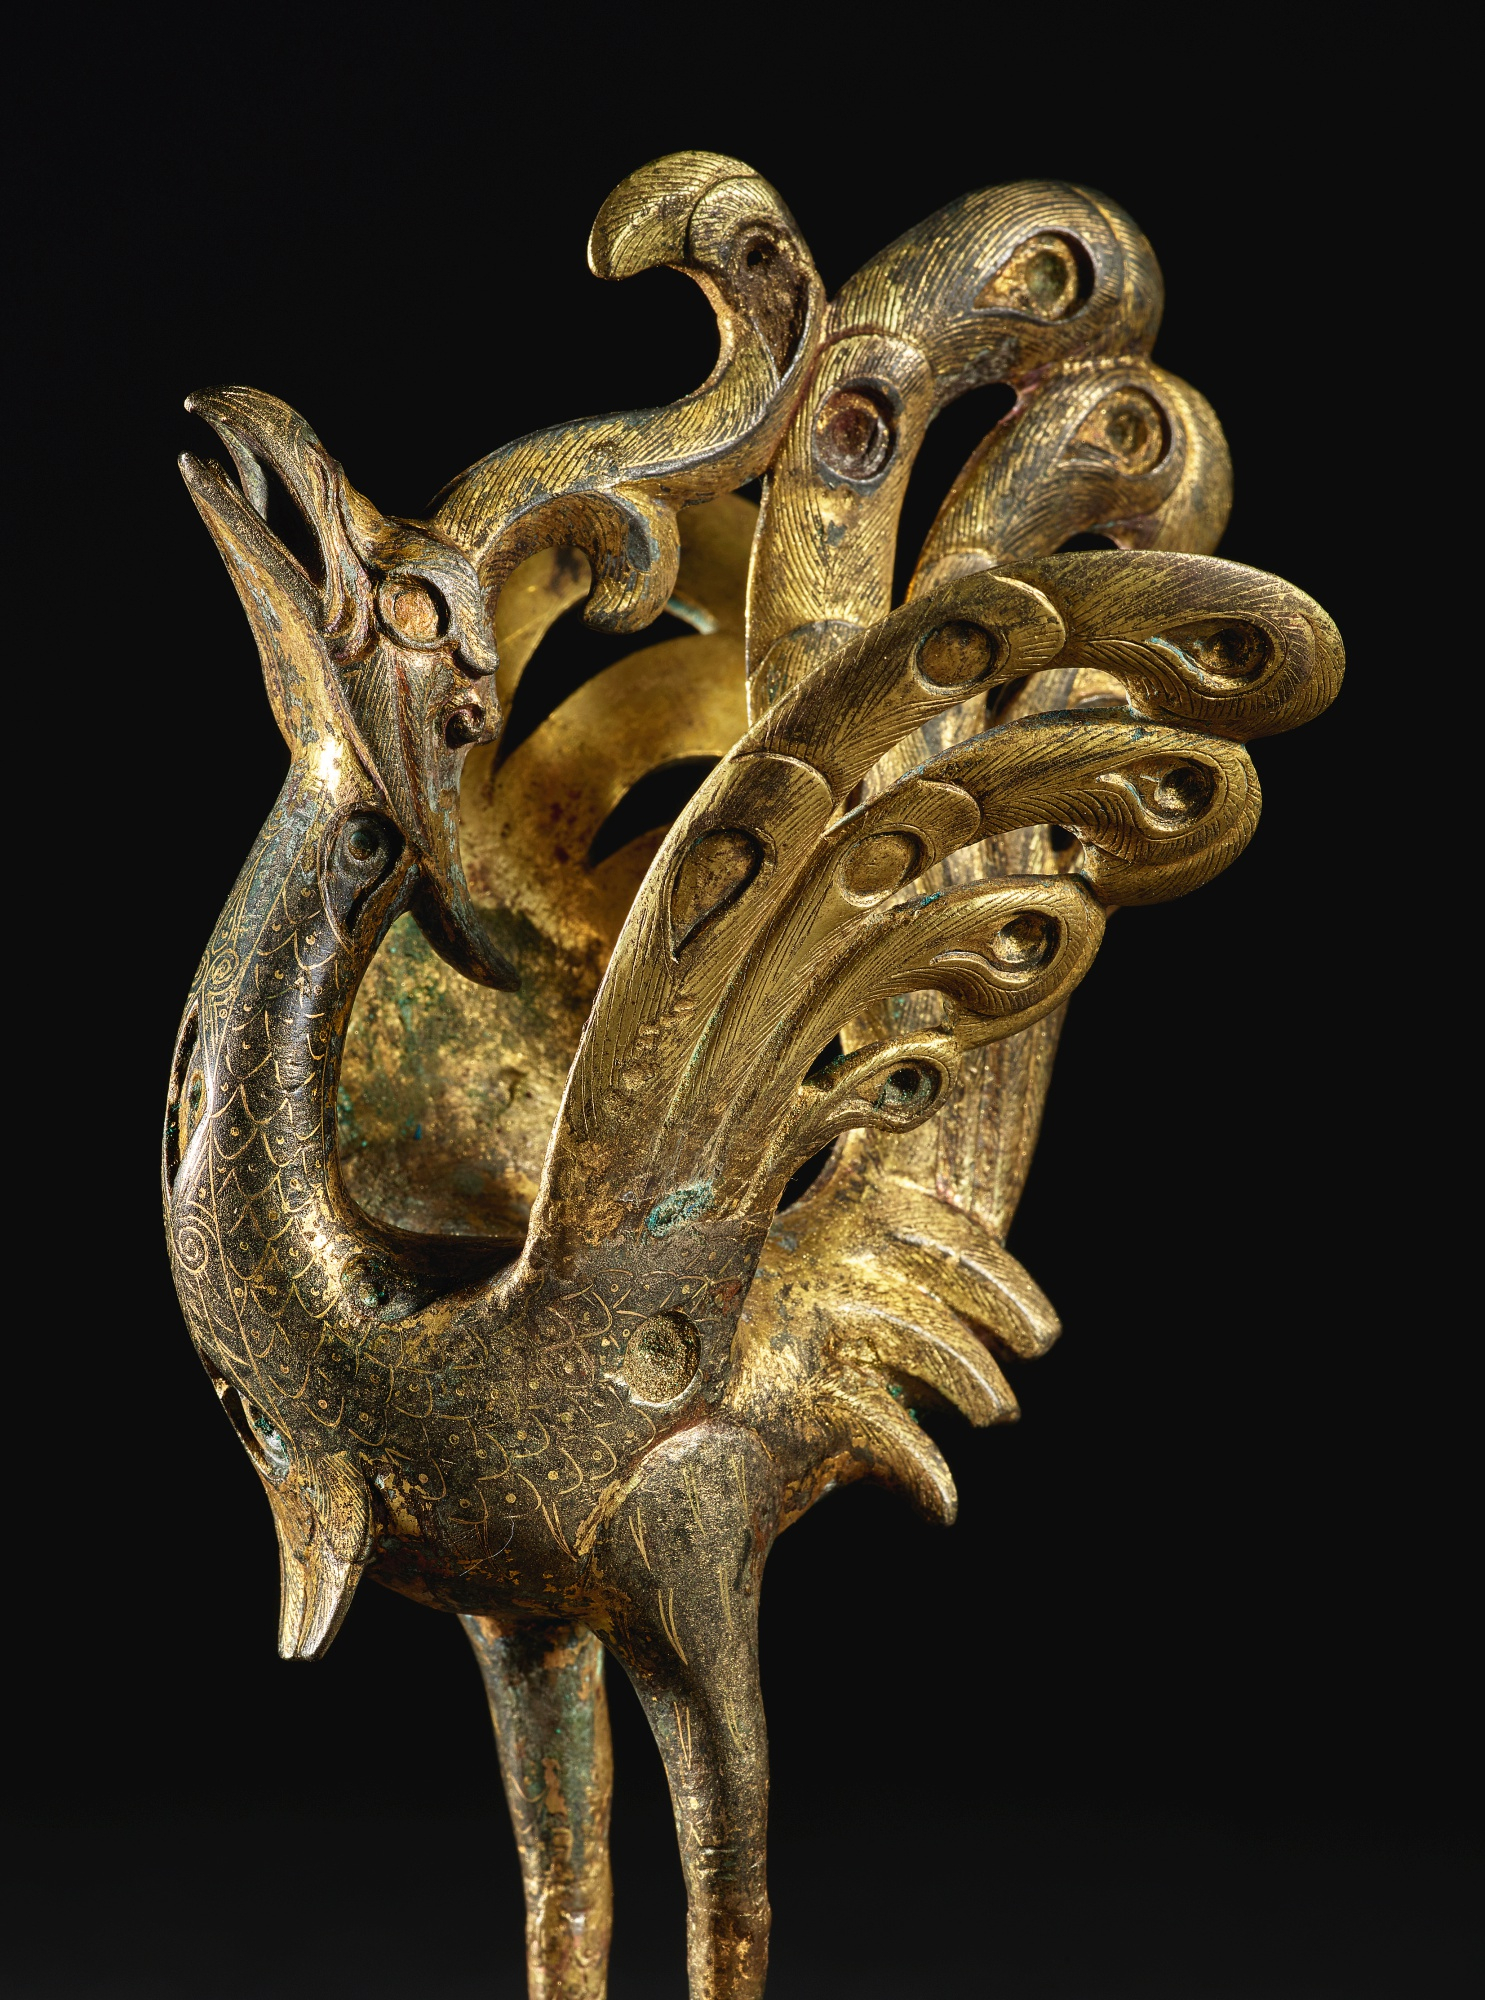 Lot 226. A splendid and rare gold and silver-inlaid parcel-gilt bronze figure of a peacock, Han dynasty (206 BC-AD 220). Height 6 1/8  in., 15.5 cm. Estimate 200,000 — 300,000 USD. Courtesy Sotheby's.